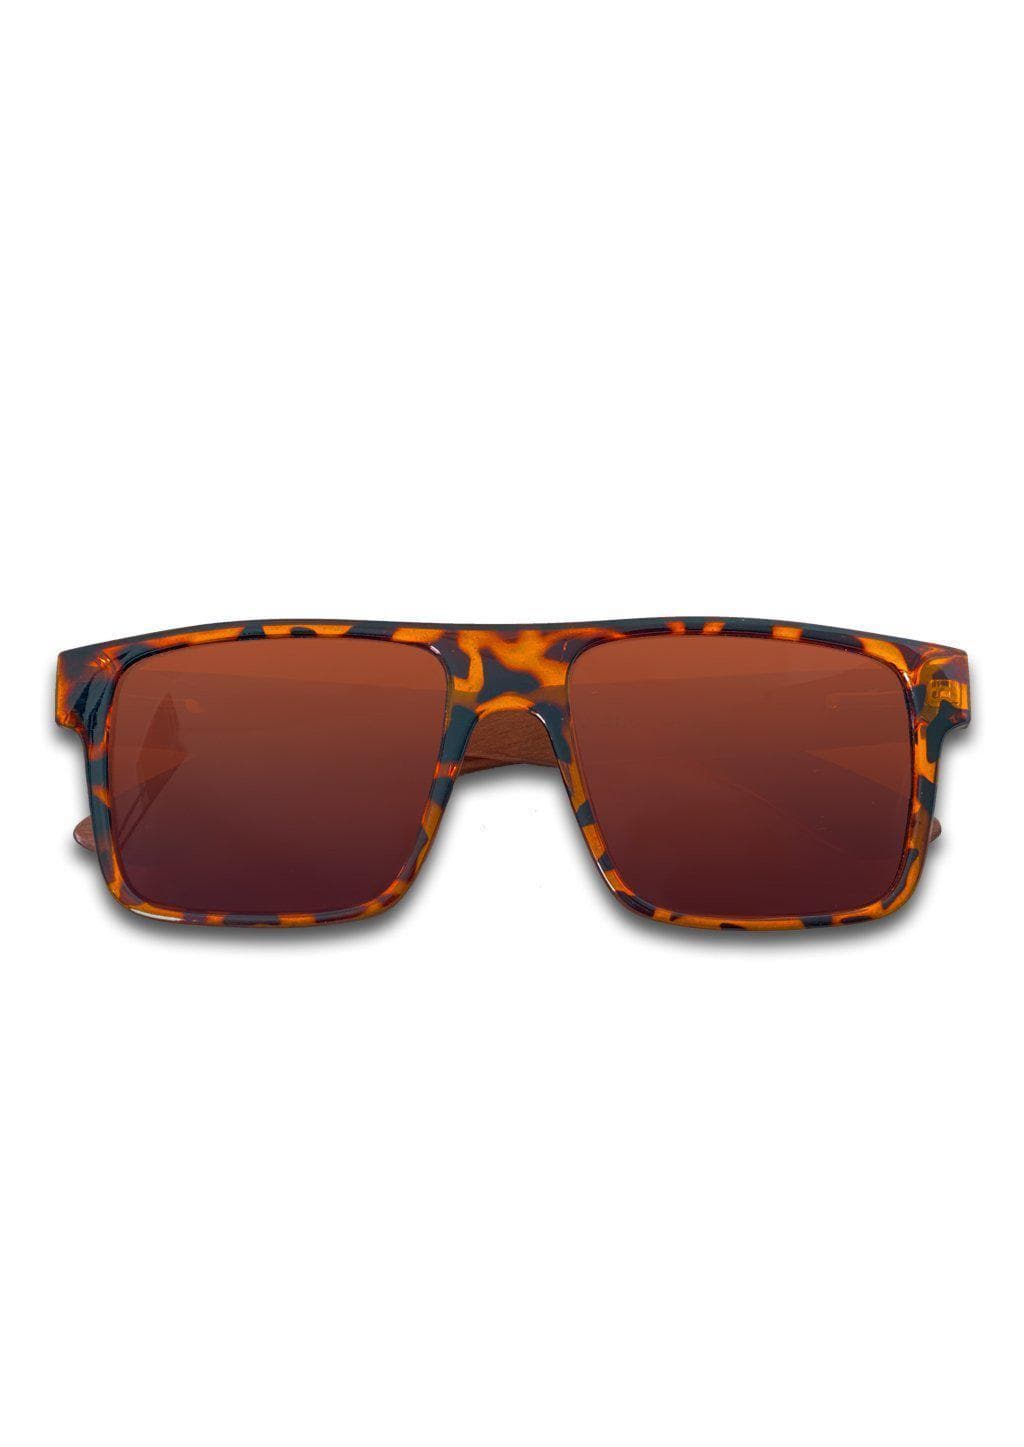 Eyewood Square - Bailey - Our square wooden sunglasses with tortoise frame.